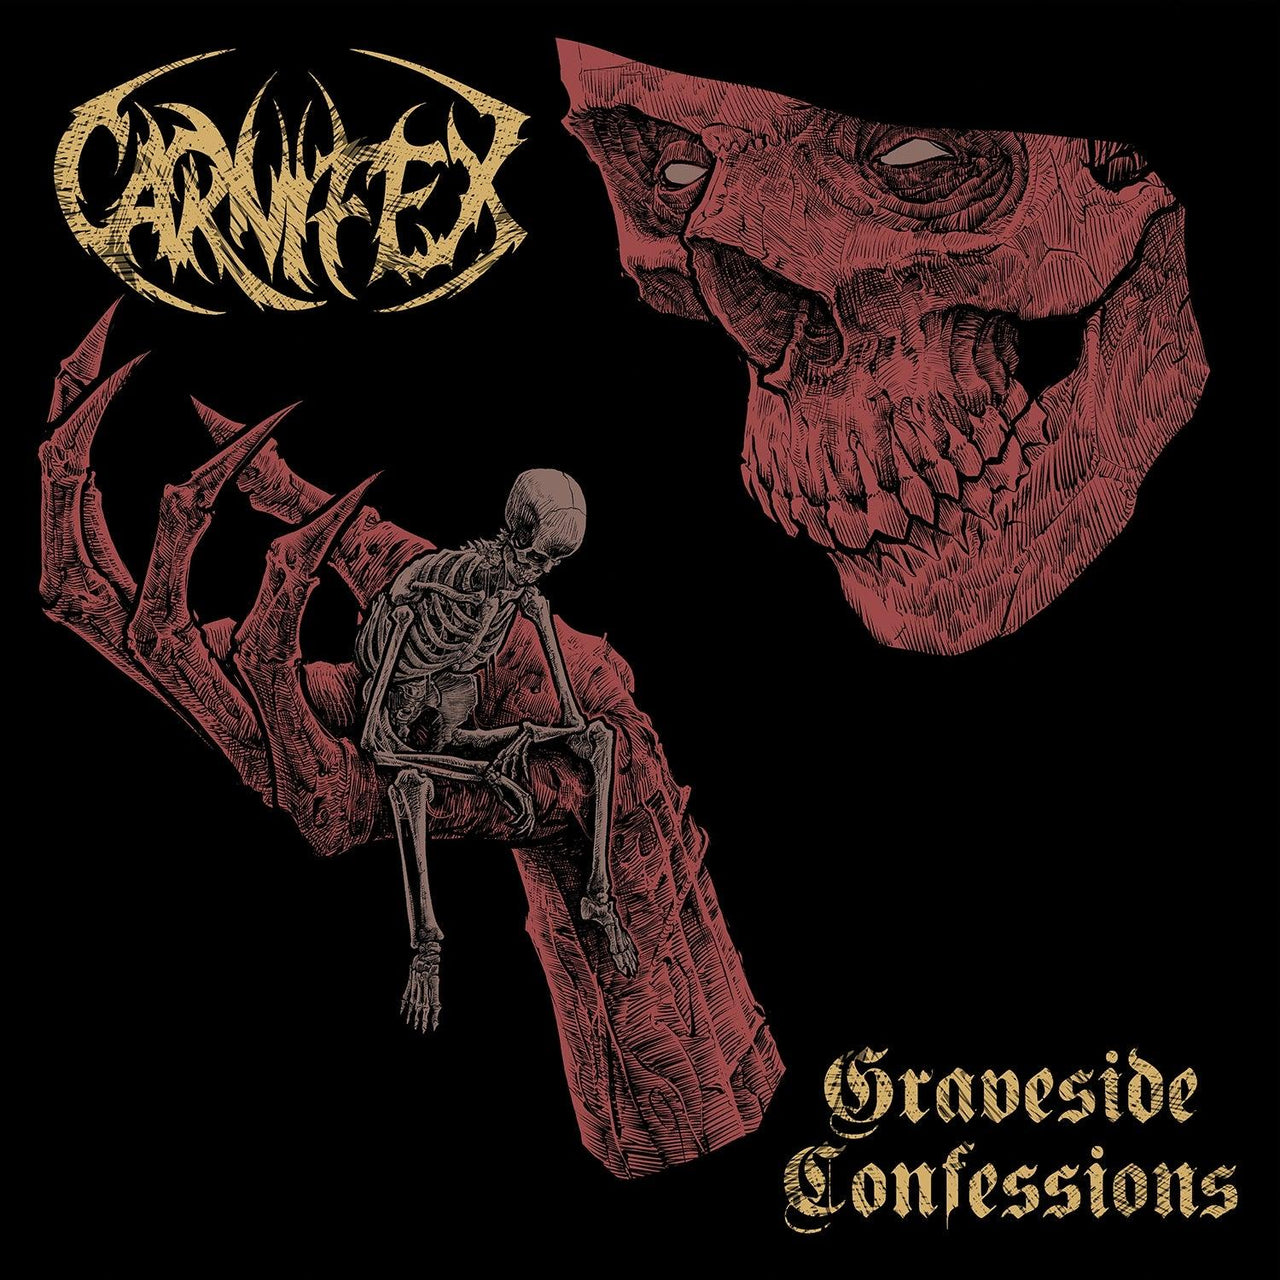 Buy – Carnifex "Graveside Confessions" 2x12" – Band & Music Merch – Cold Cuts Merch